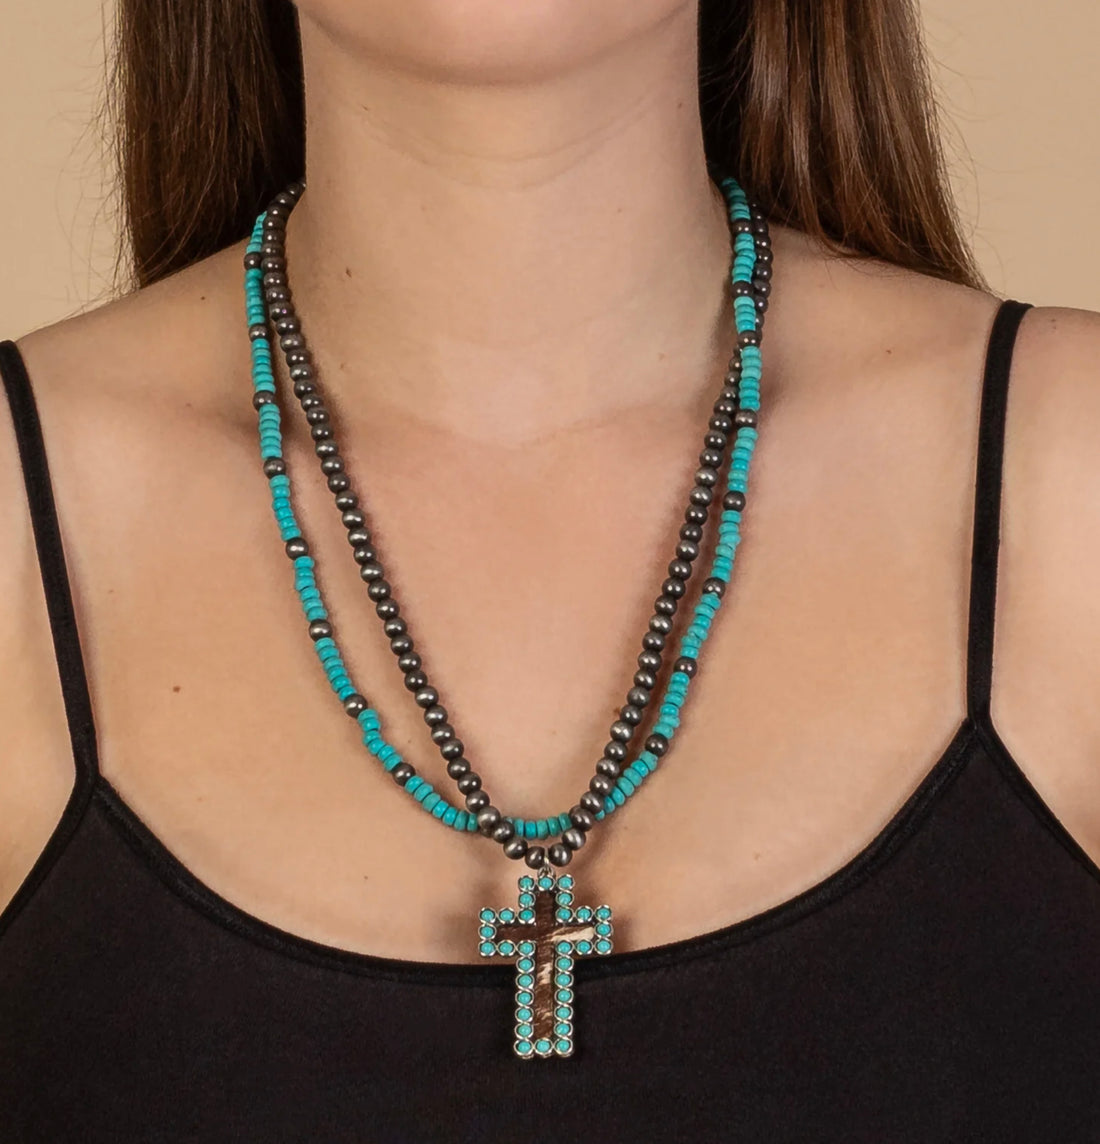 Animal Print Cross Necklace with Matching Earrings